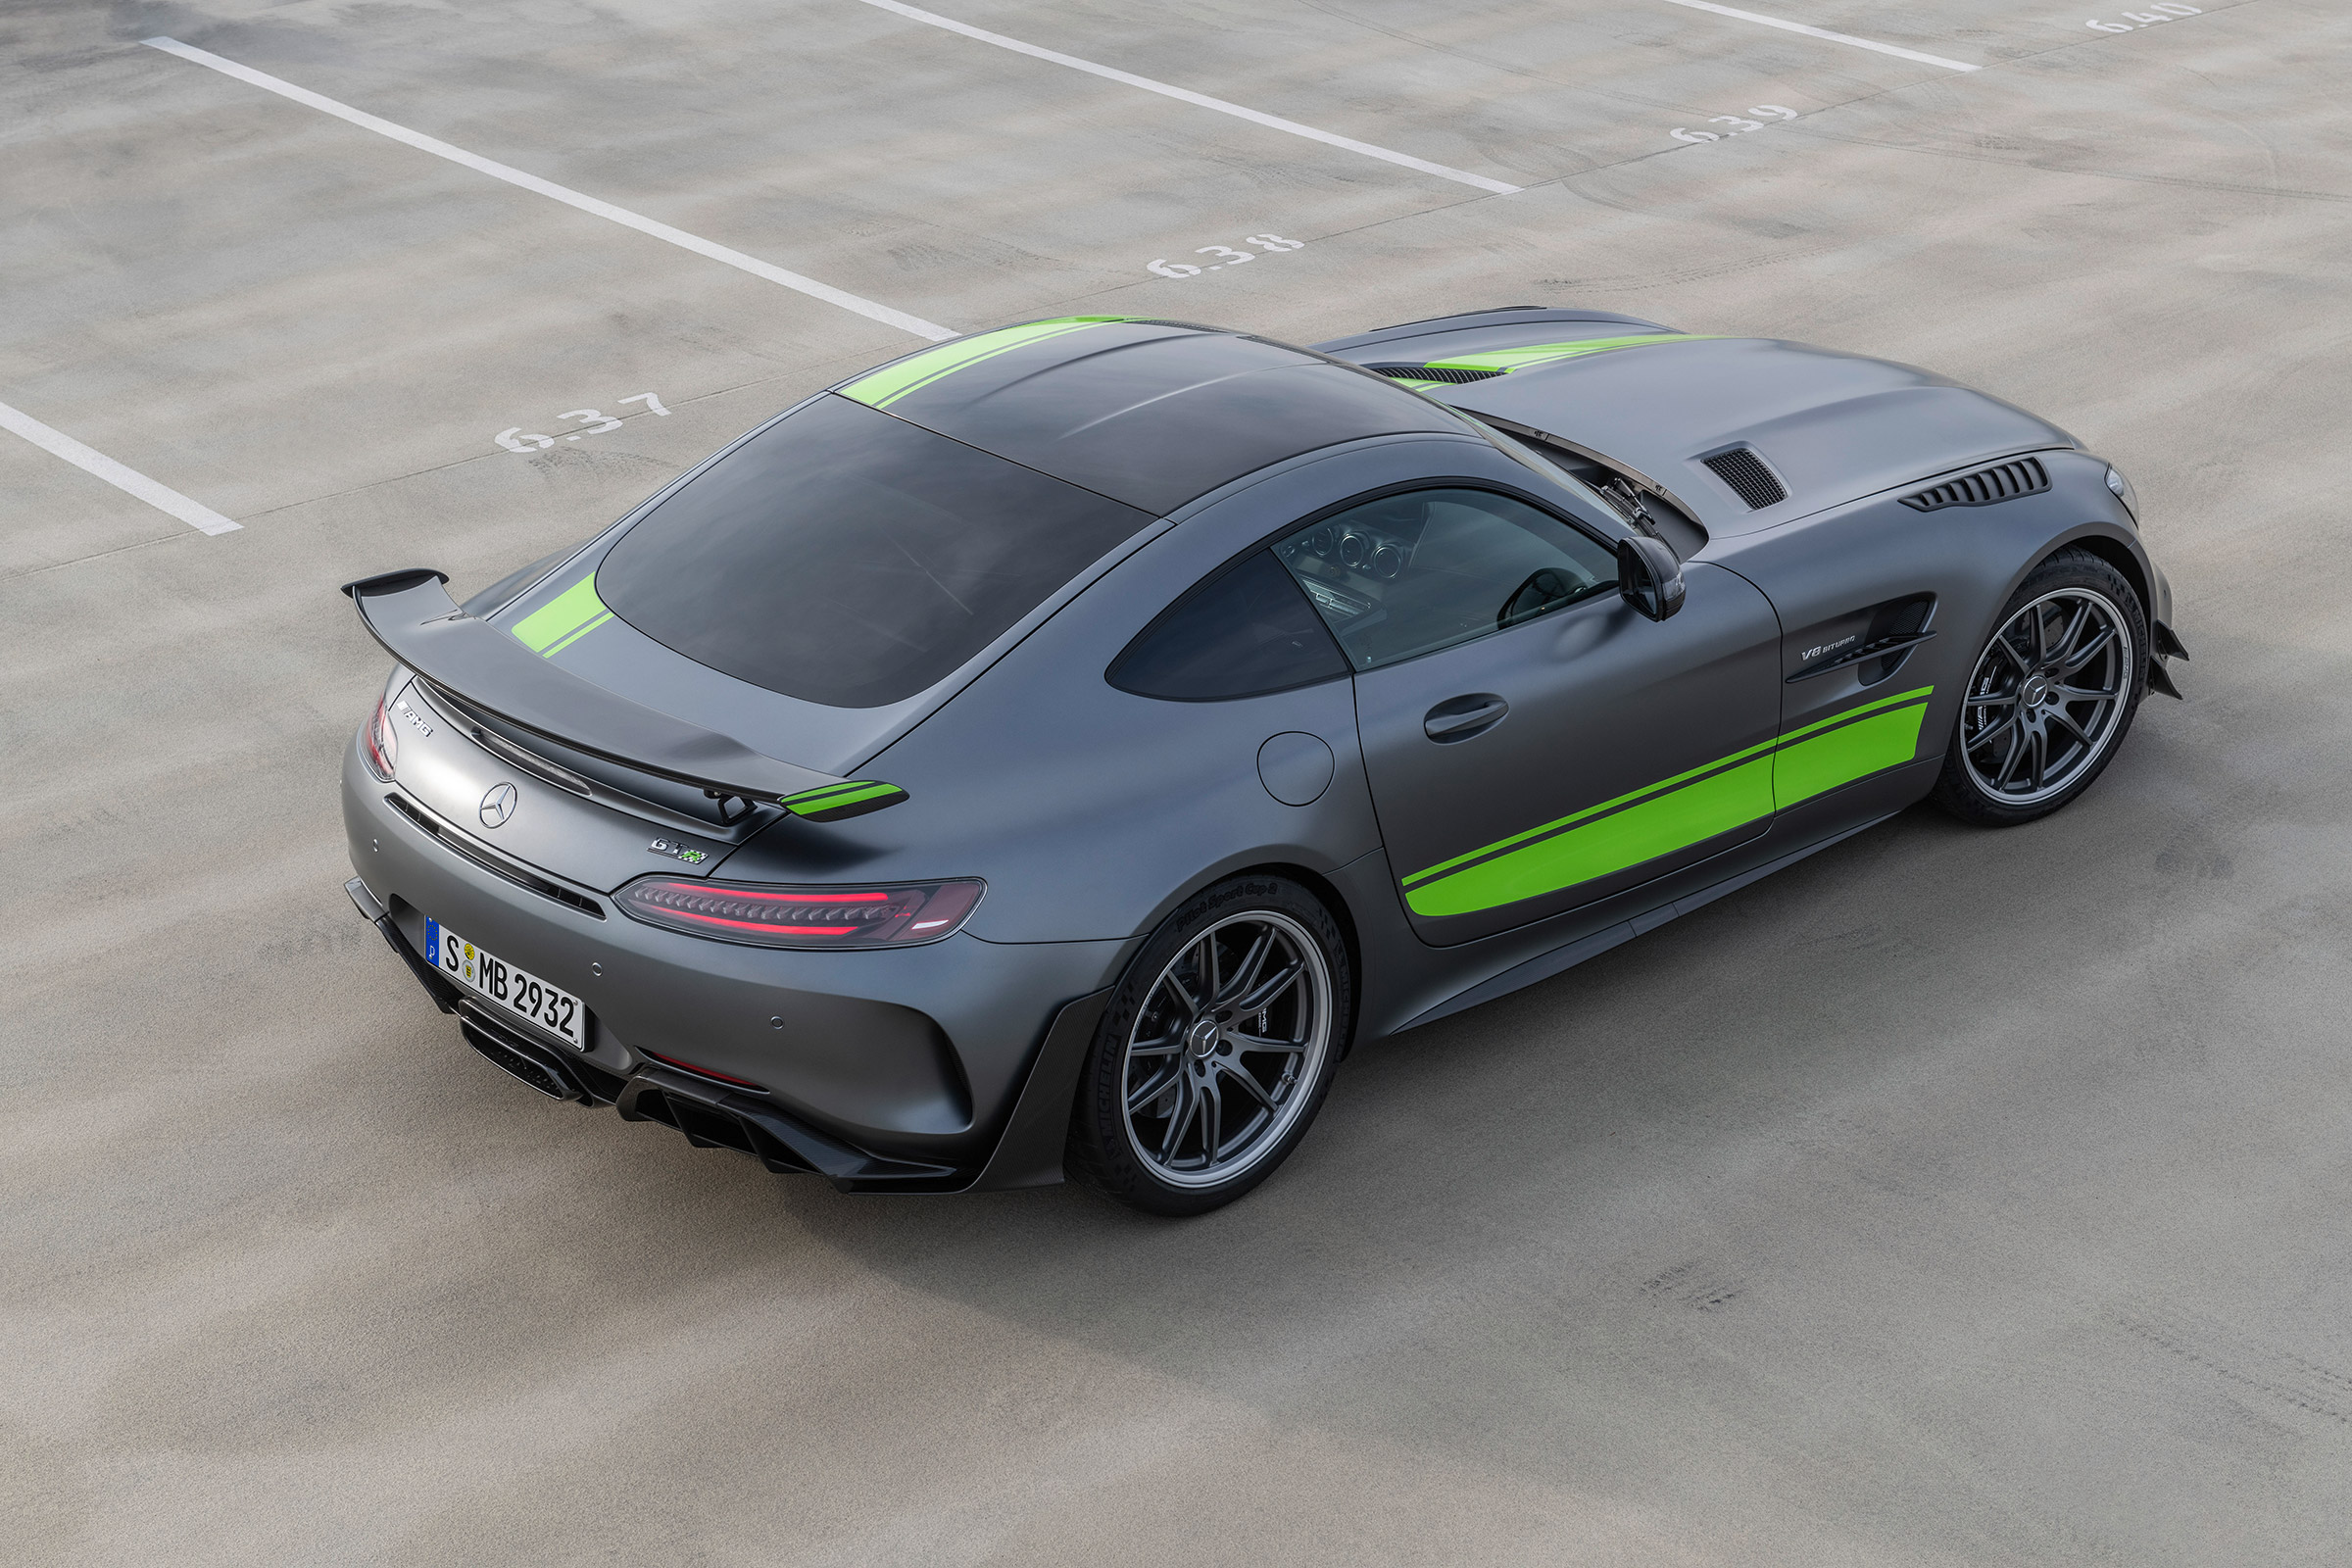 Mercedes Amg Gt R Pro Review Amg Track Focuses Its Gt3 Rival Evo